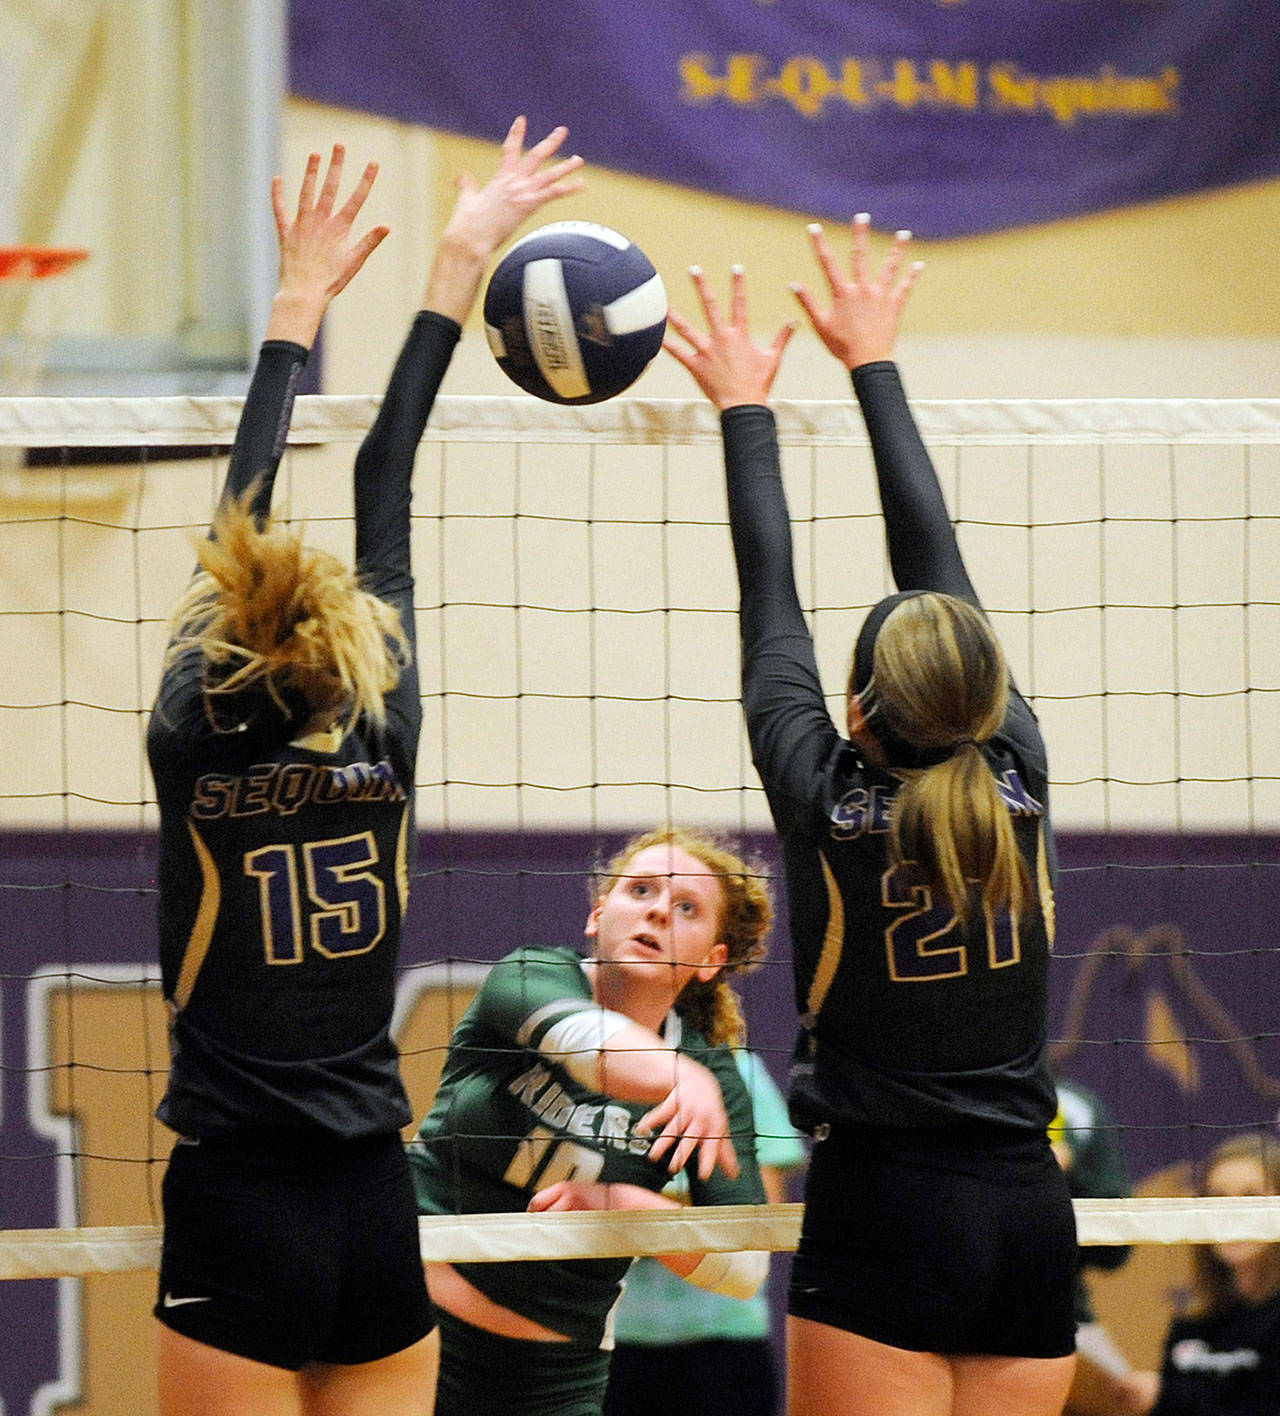 Port Angeles’ Kennedy Bruch, center, returns the volleyball between the hands of Sequim’s Kendall Hastings, left, and Kali Wiker during an October 2019 match in Sequim. (Michael Dashiell/Olympic Peninsula News Group file)